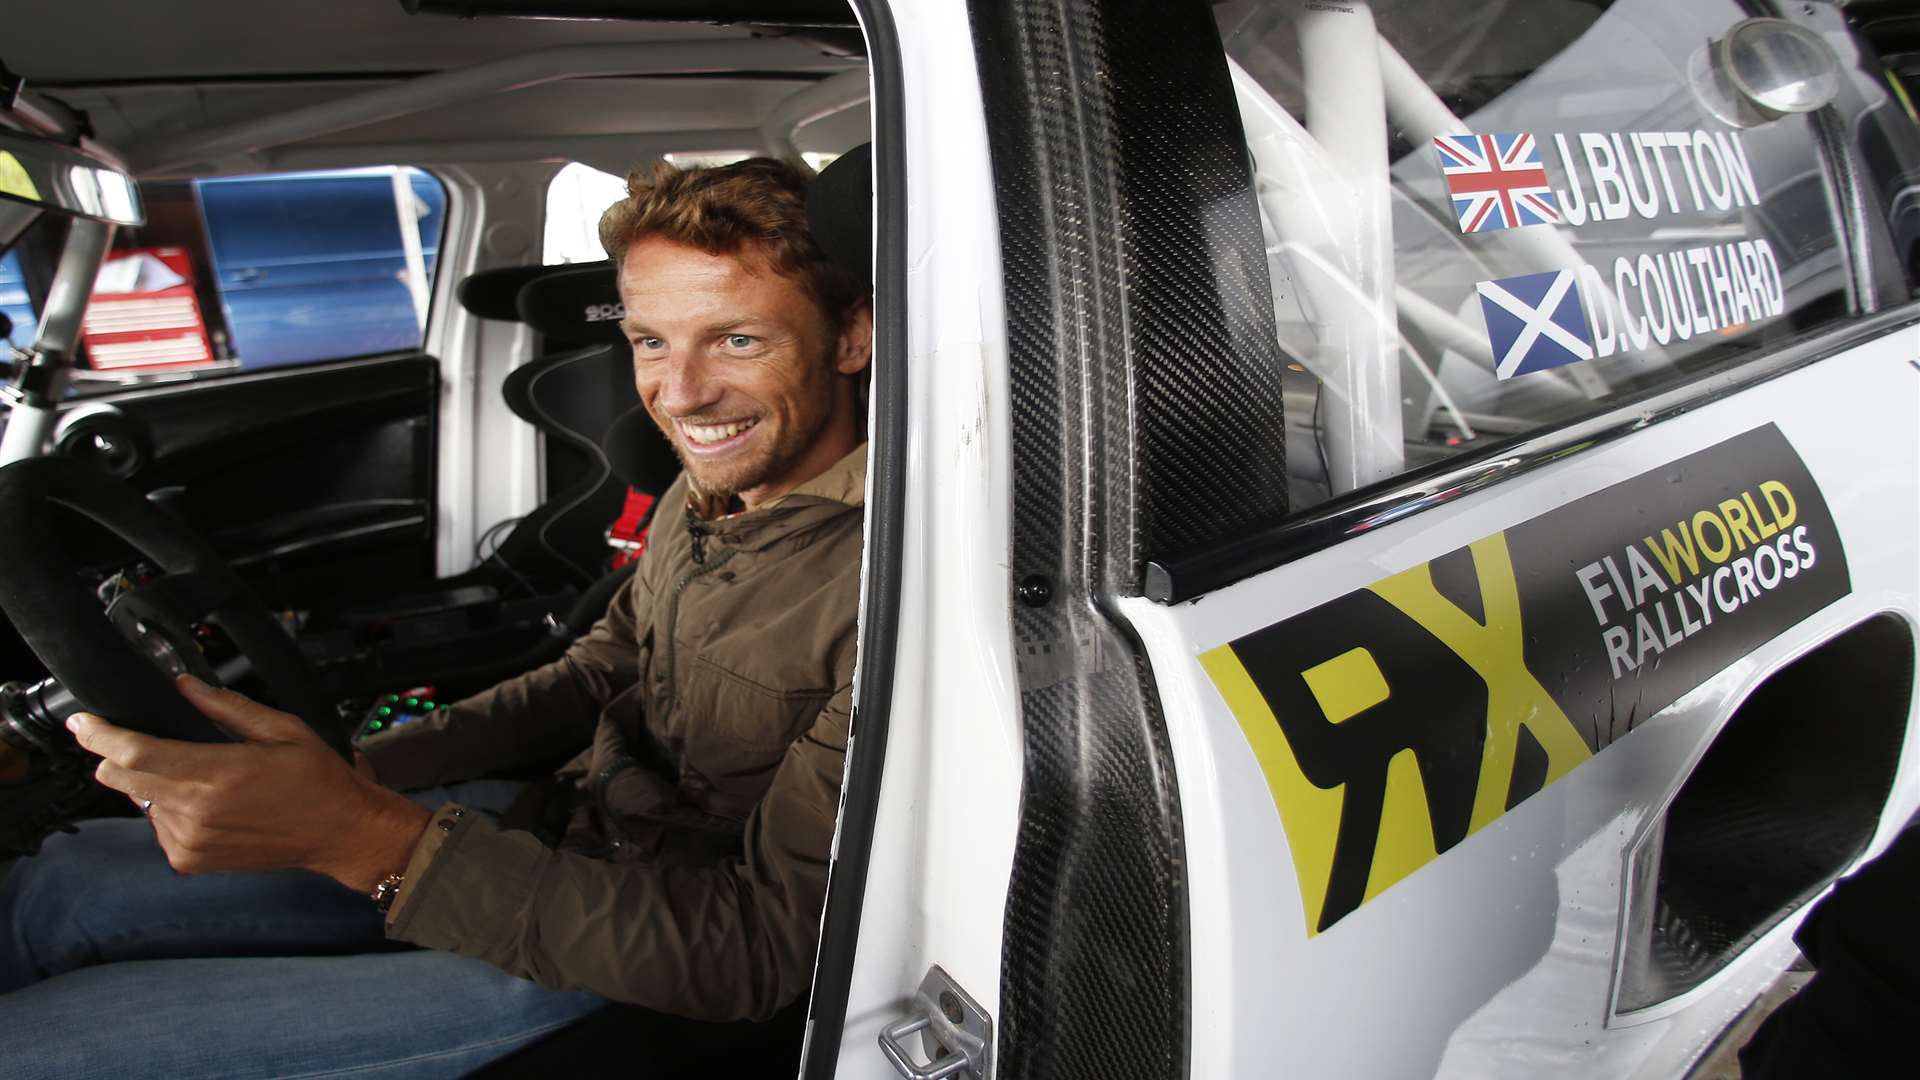 Jenson Button gets comfy in the 500bhp FIA World Rallycross supercar